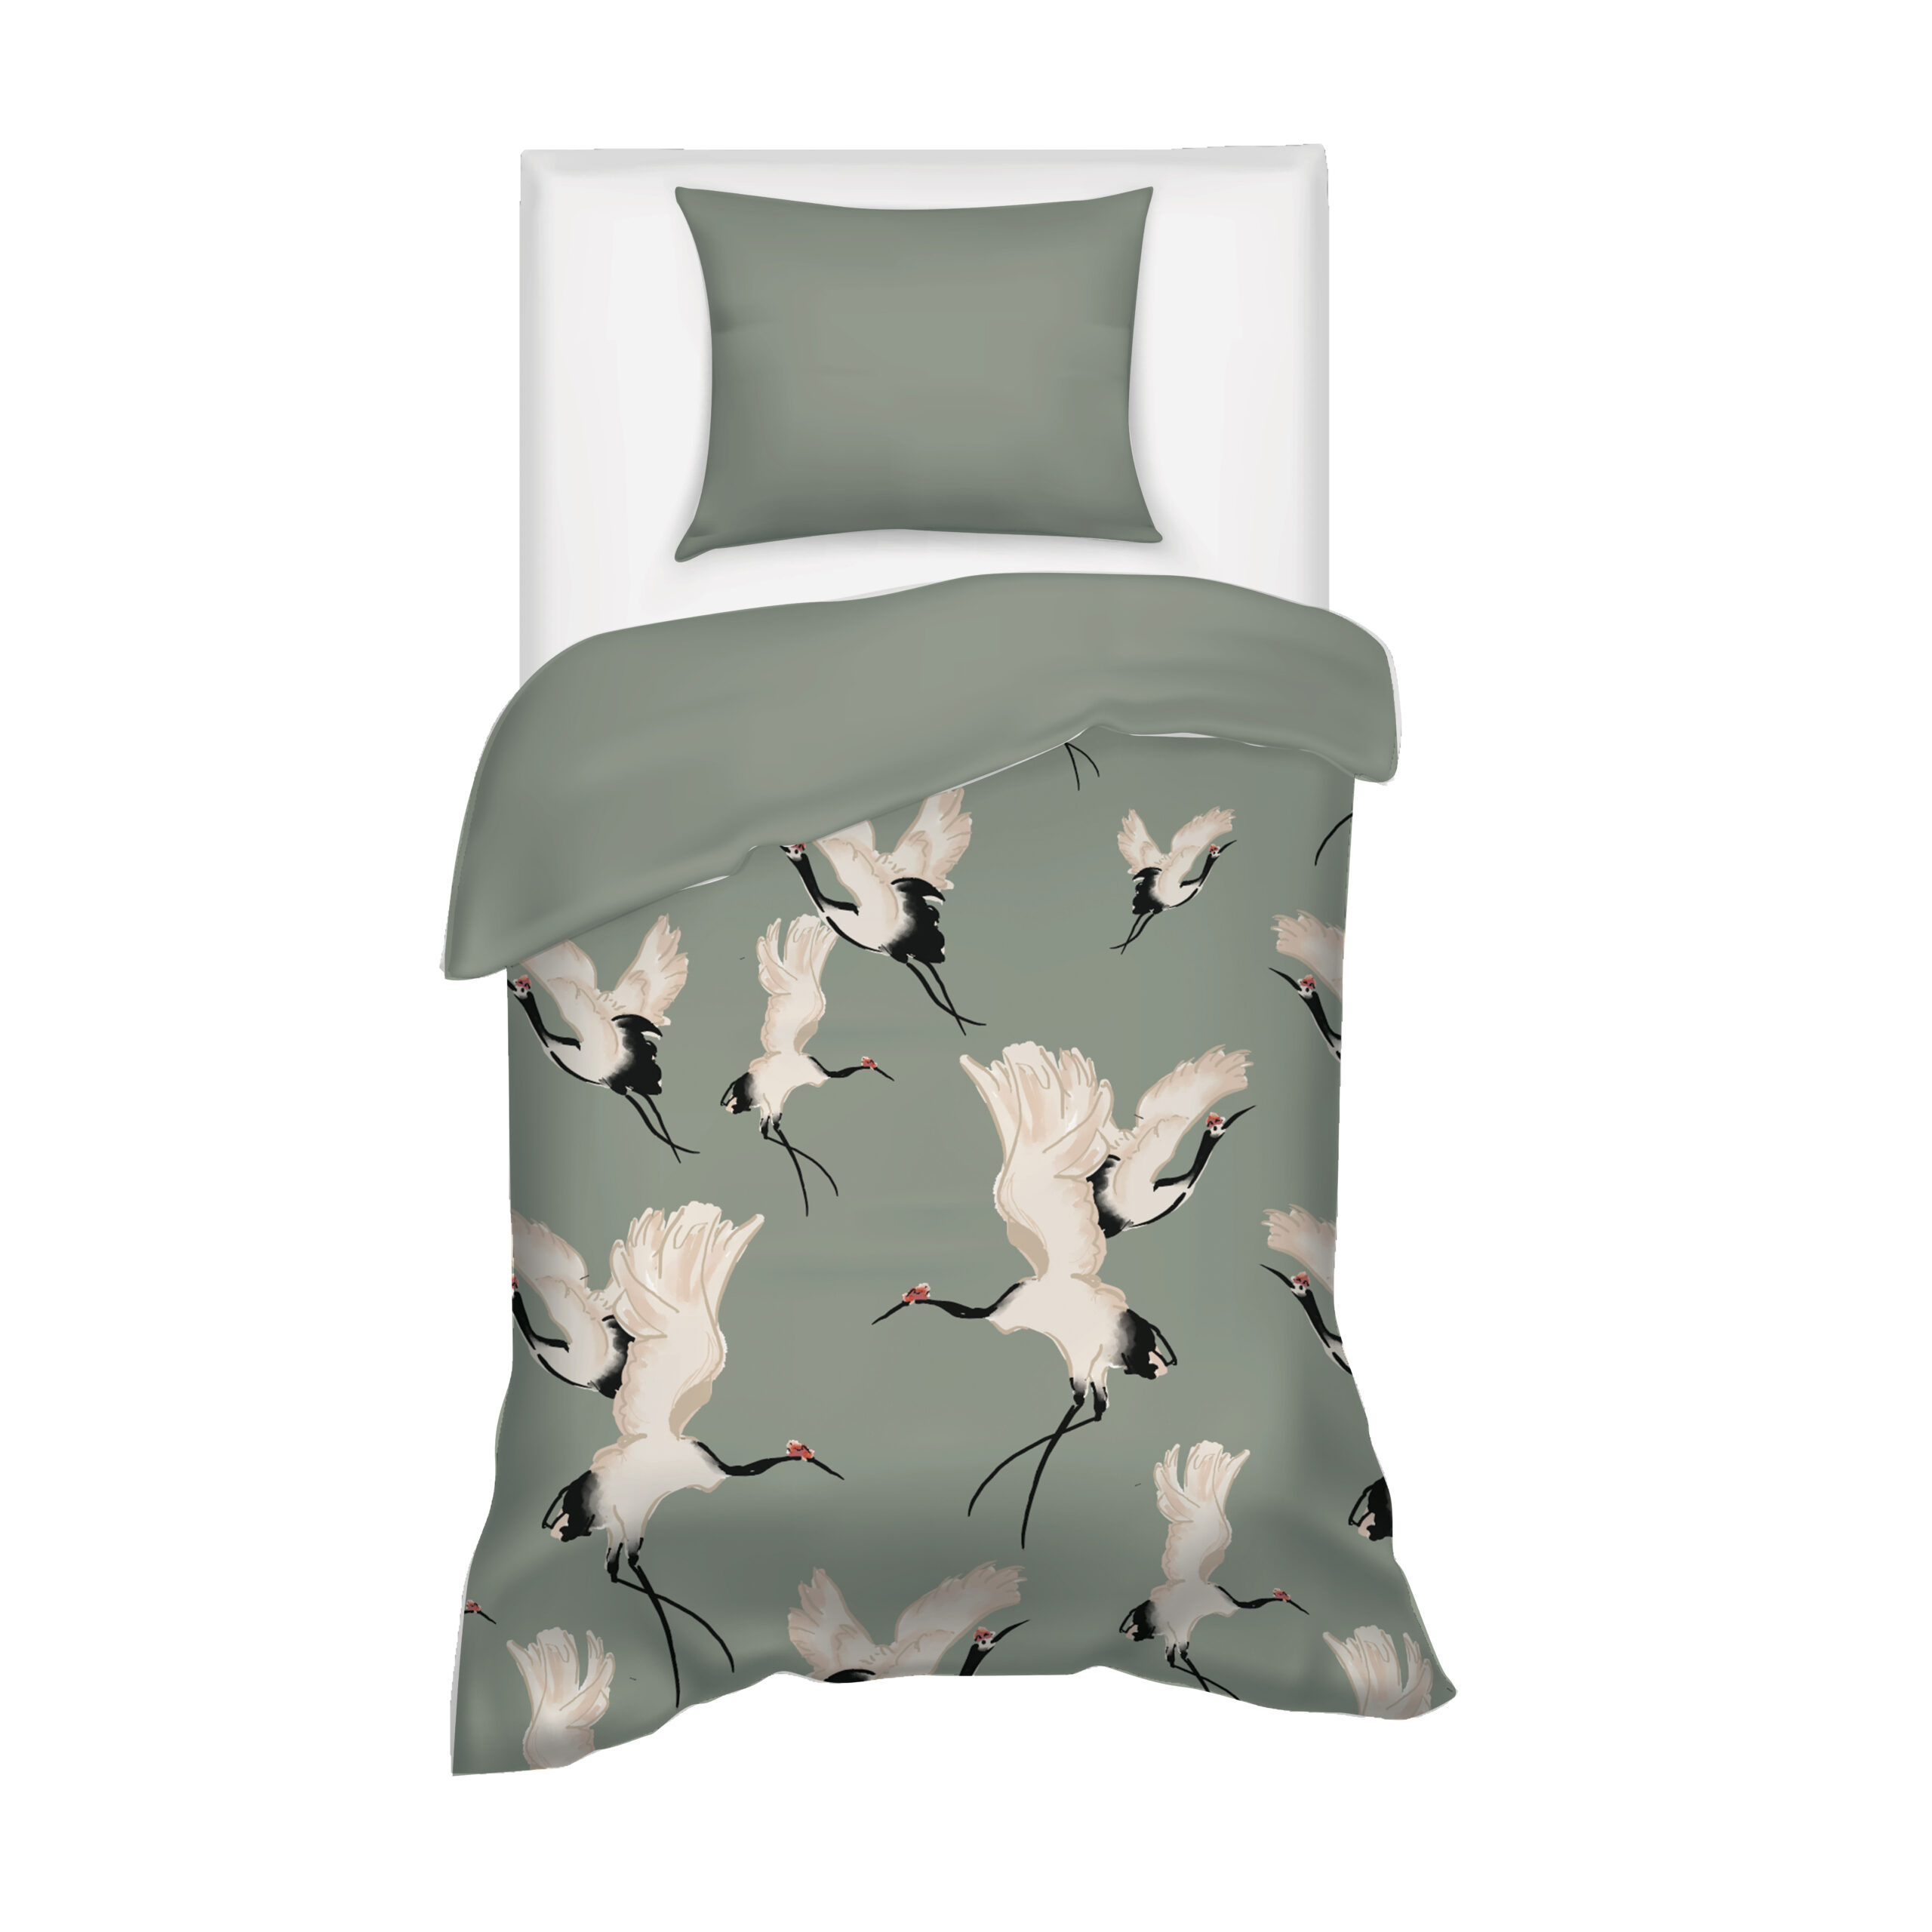 Villa Madelief 120 x 150cm Green White Cranes Printed Juniors Duvet Cover with 1 Pillowcase